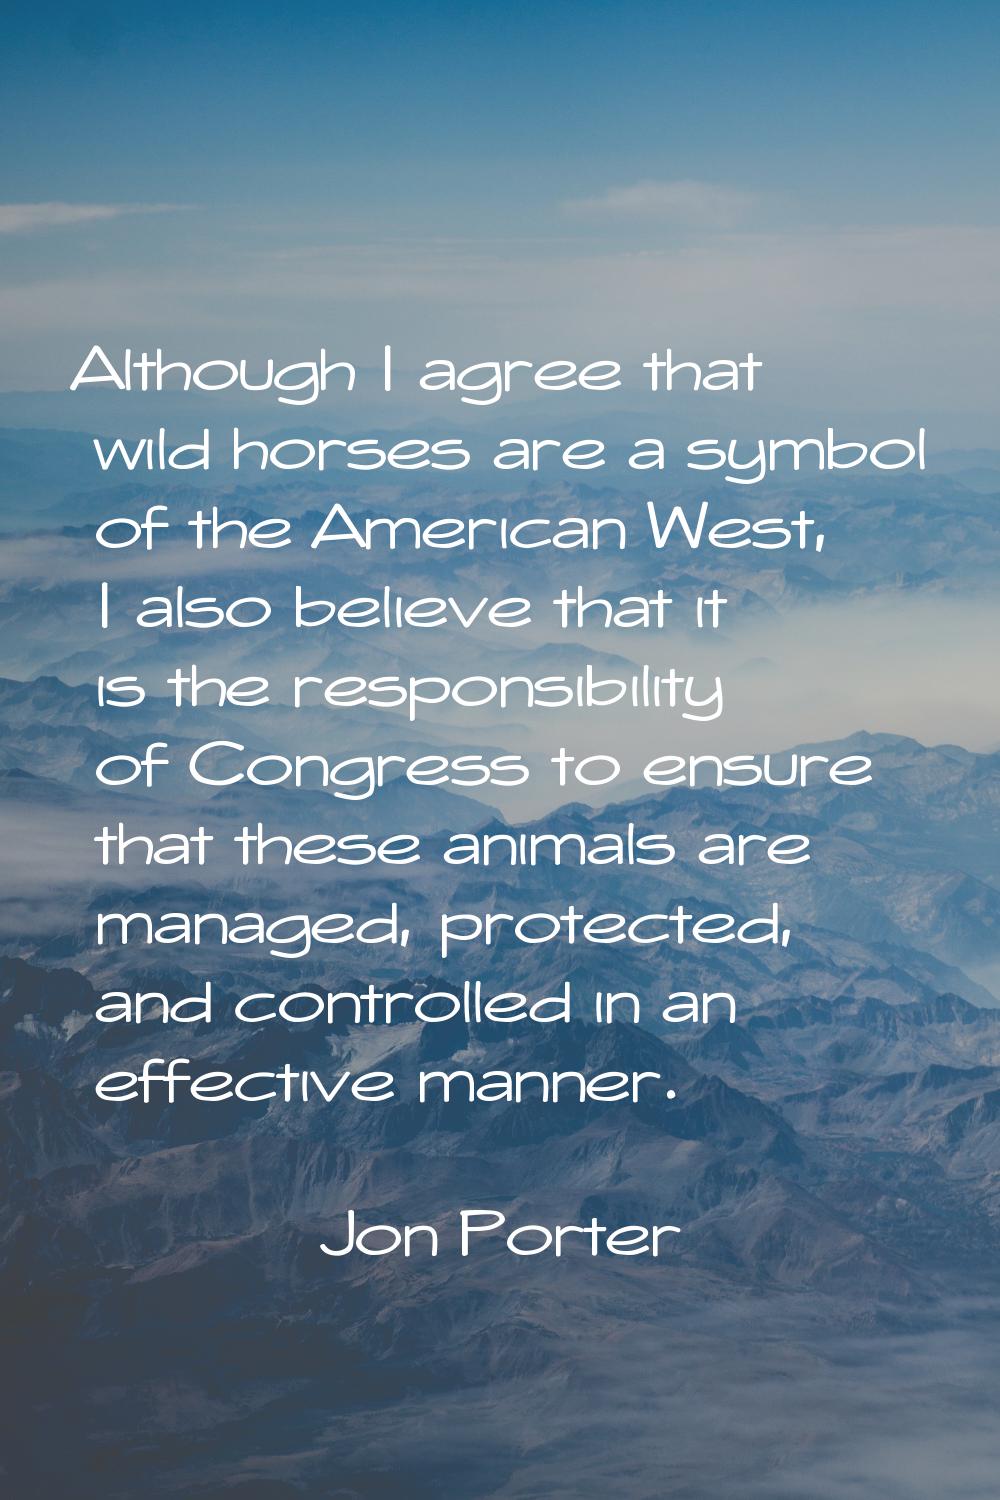 Although I agree that wild horses are a symbol of the American West, I also believe that it is the 